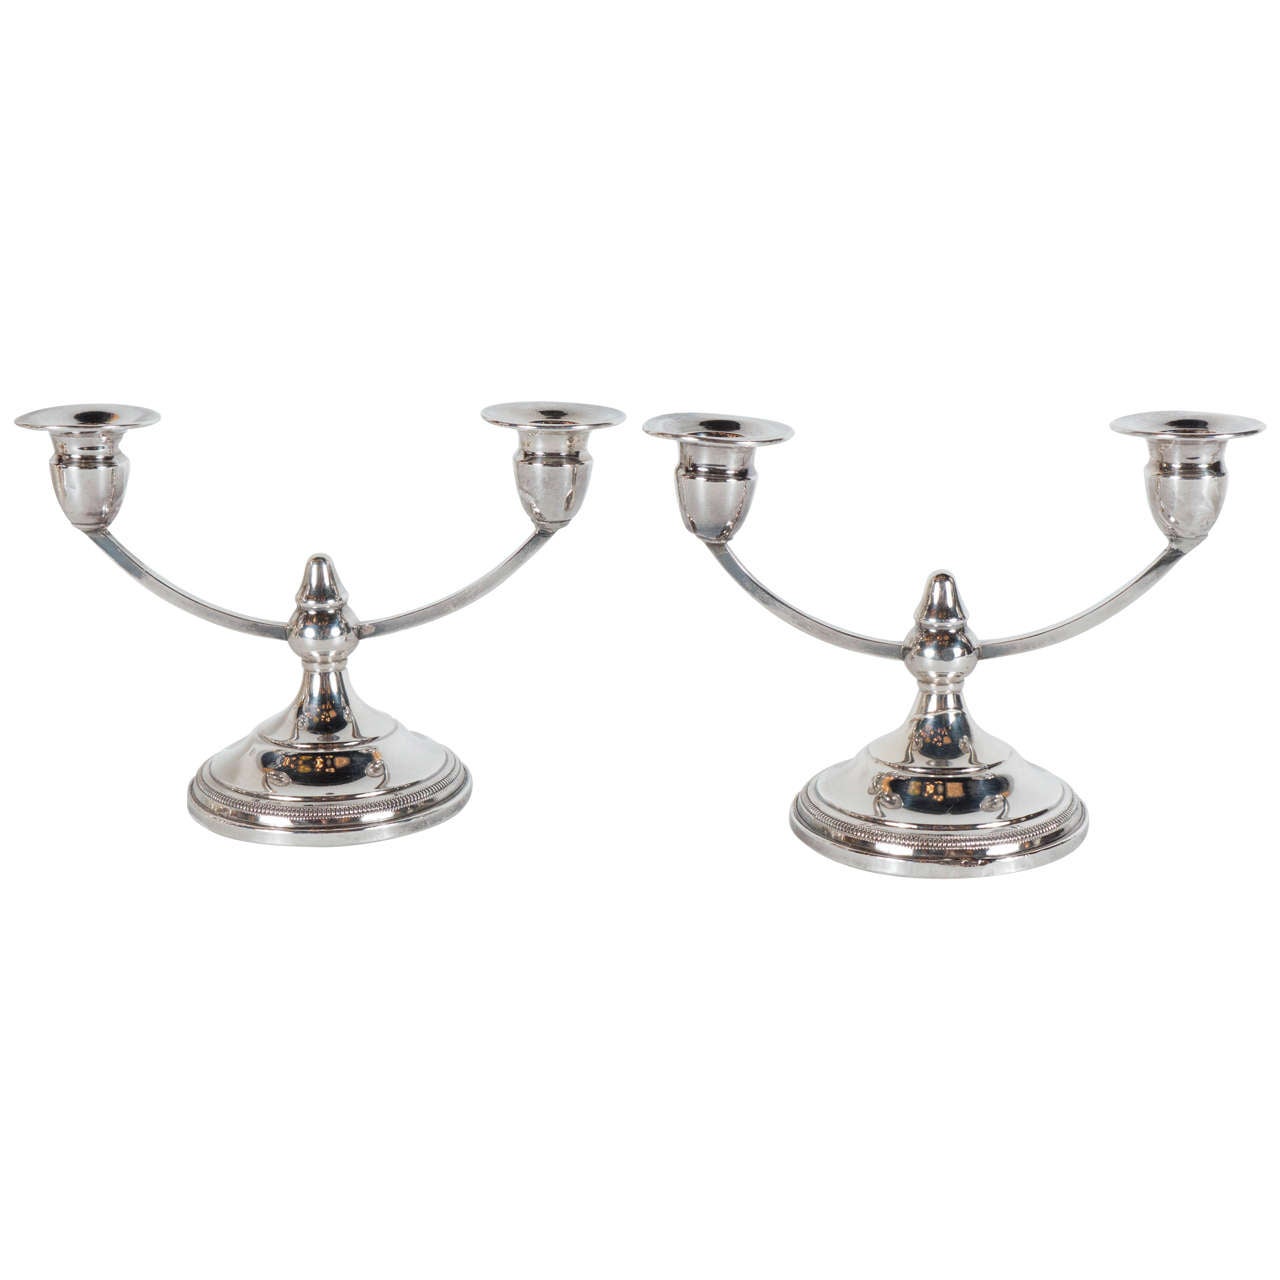 Stunning Art Deco Pair of Sterling Silver Candleholders